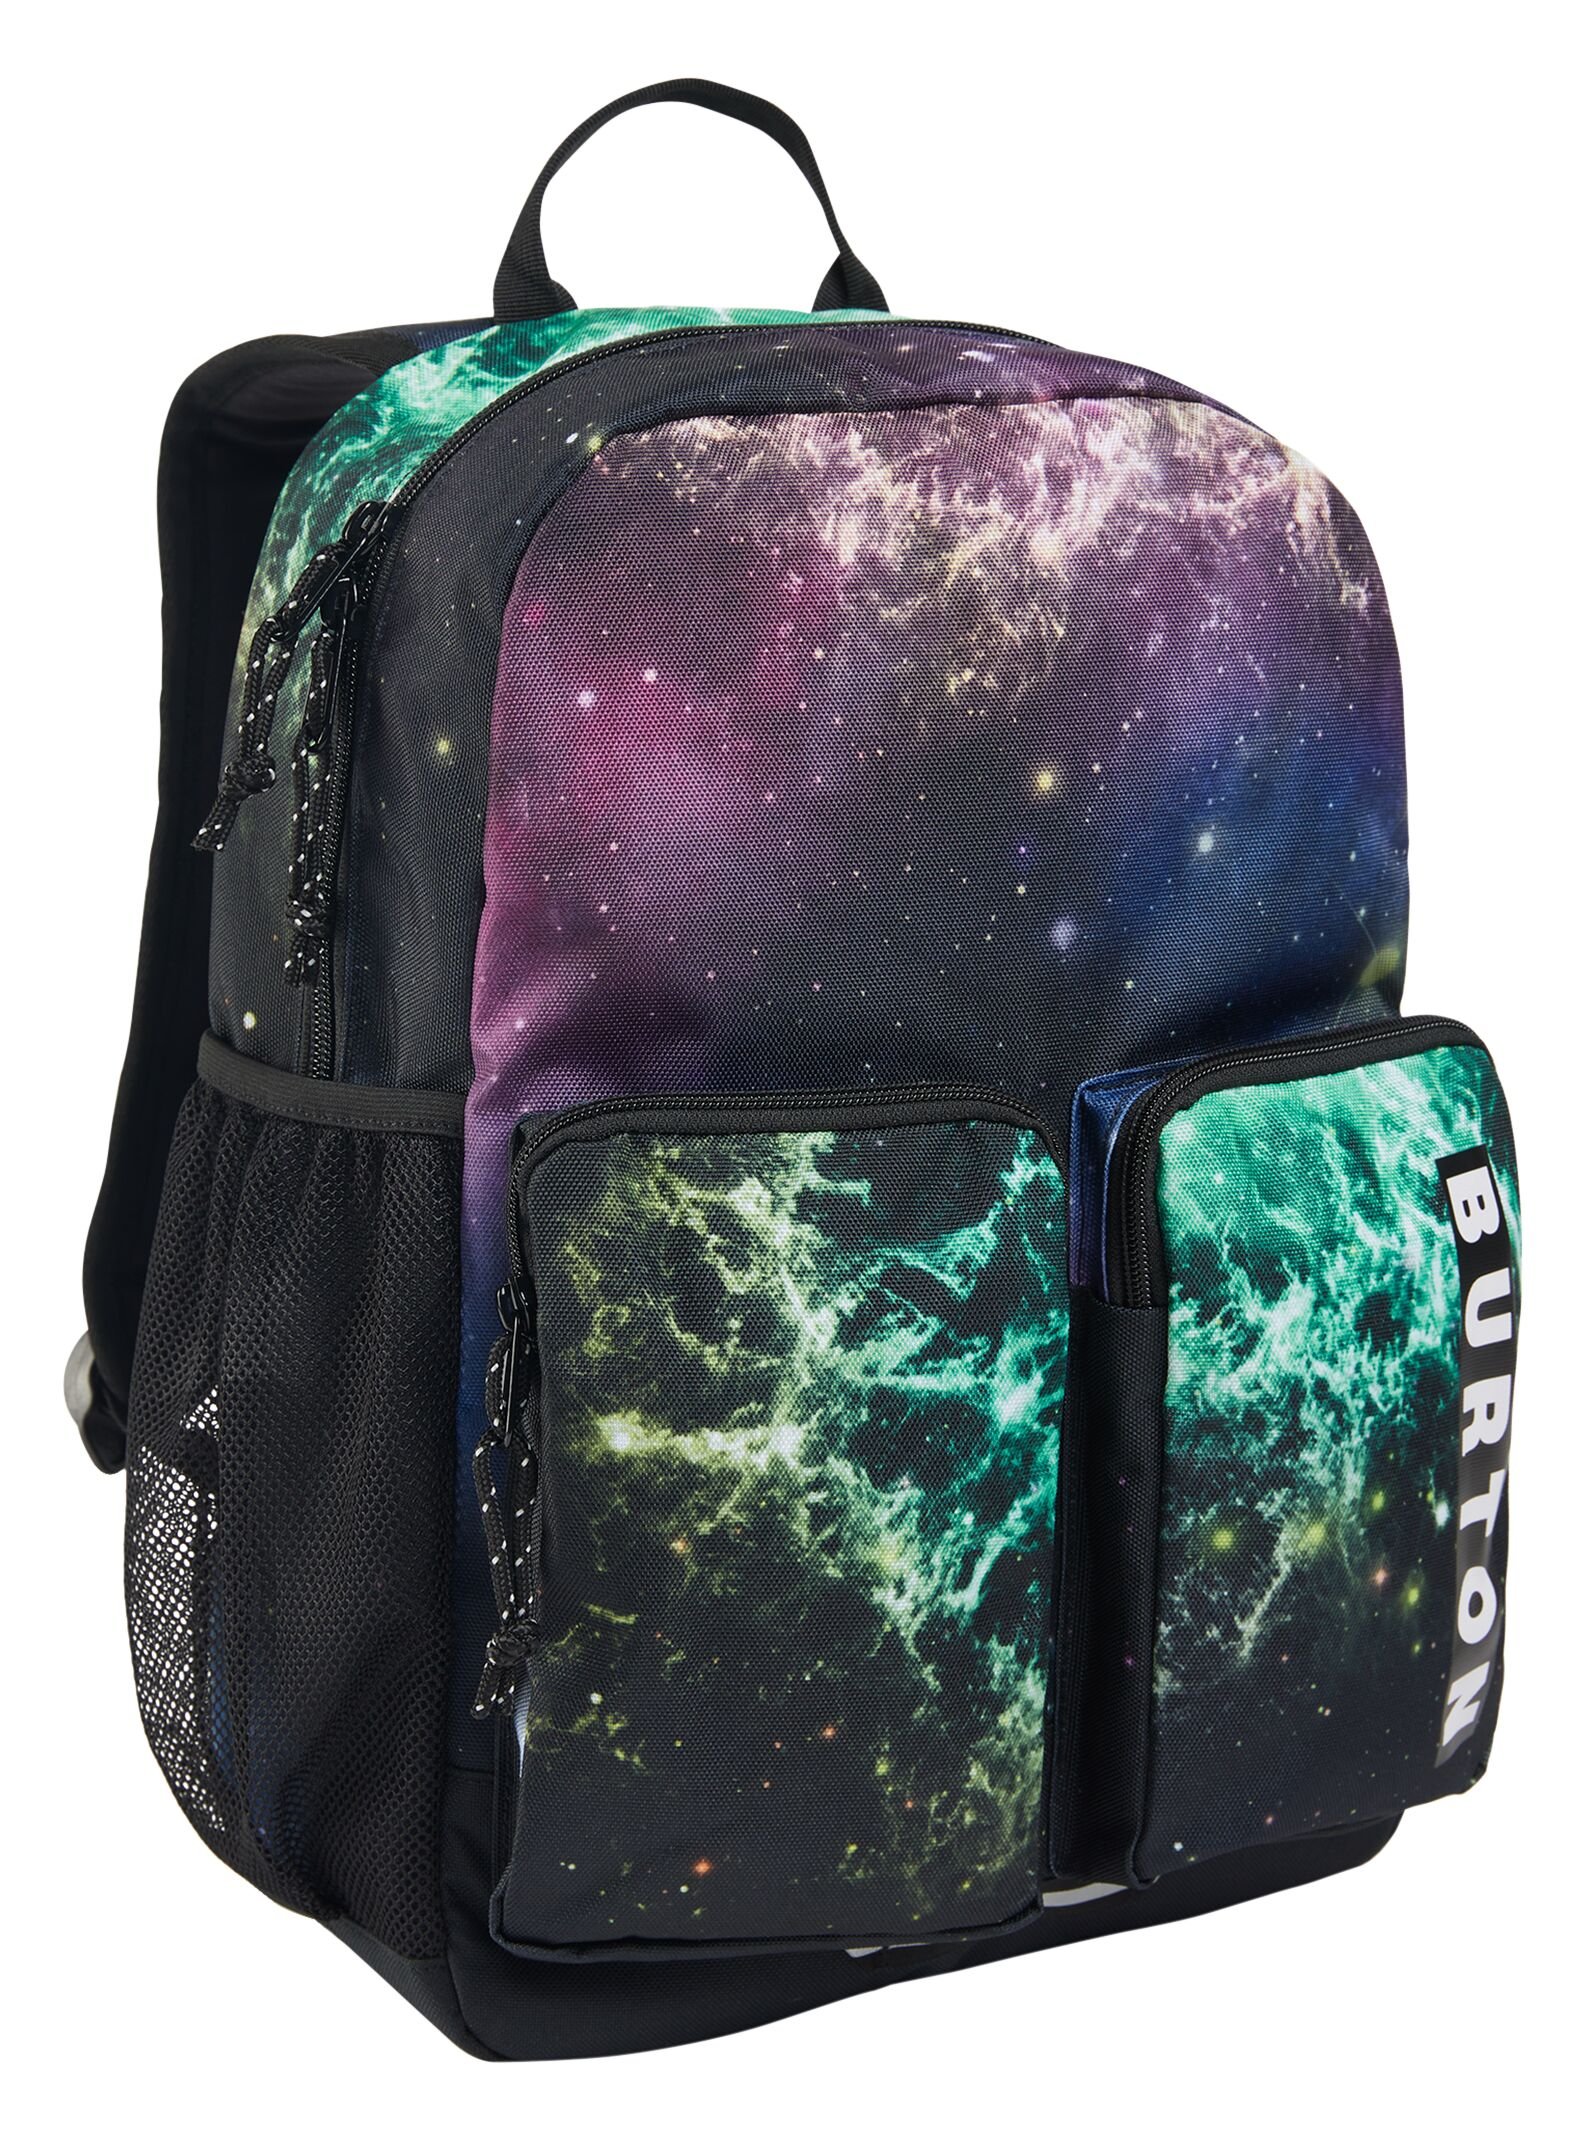 Gromlet_15L Backpack_Painted Planets